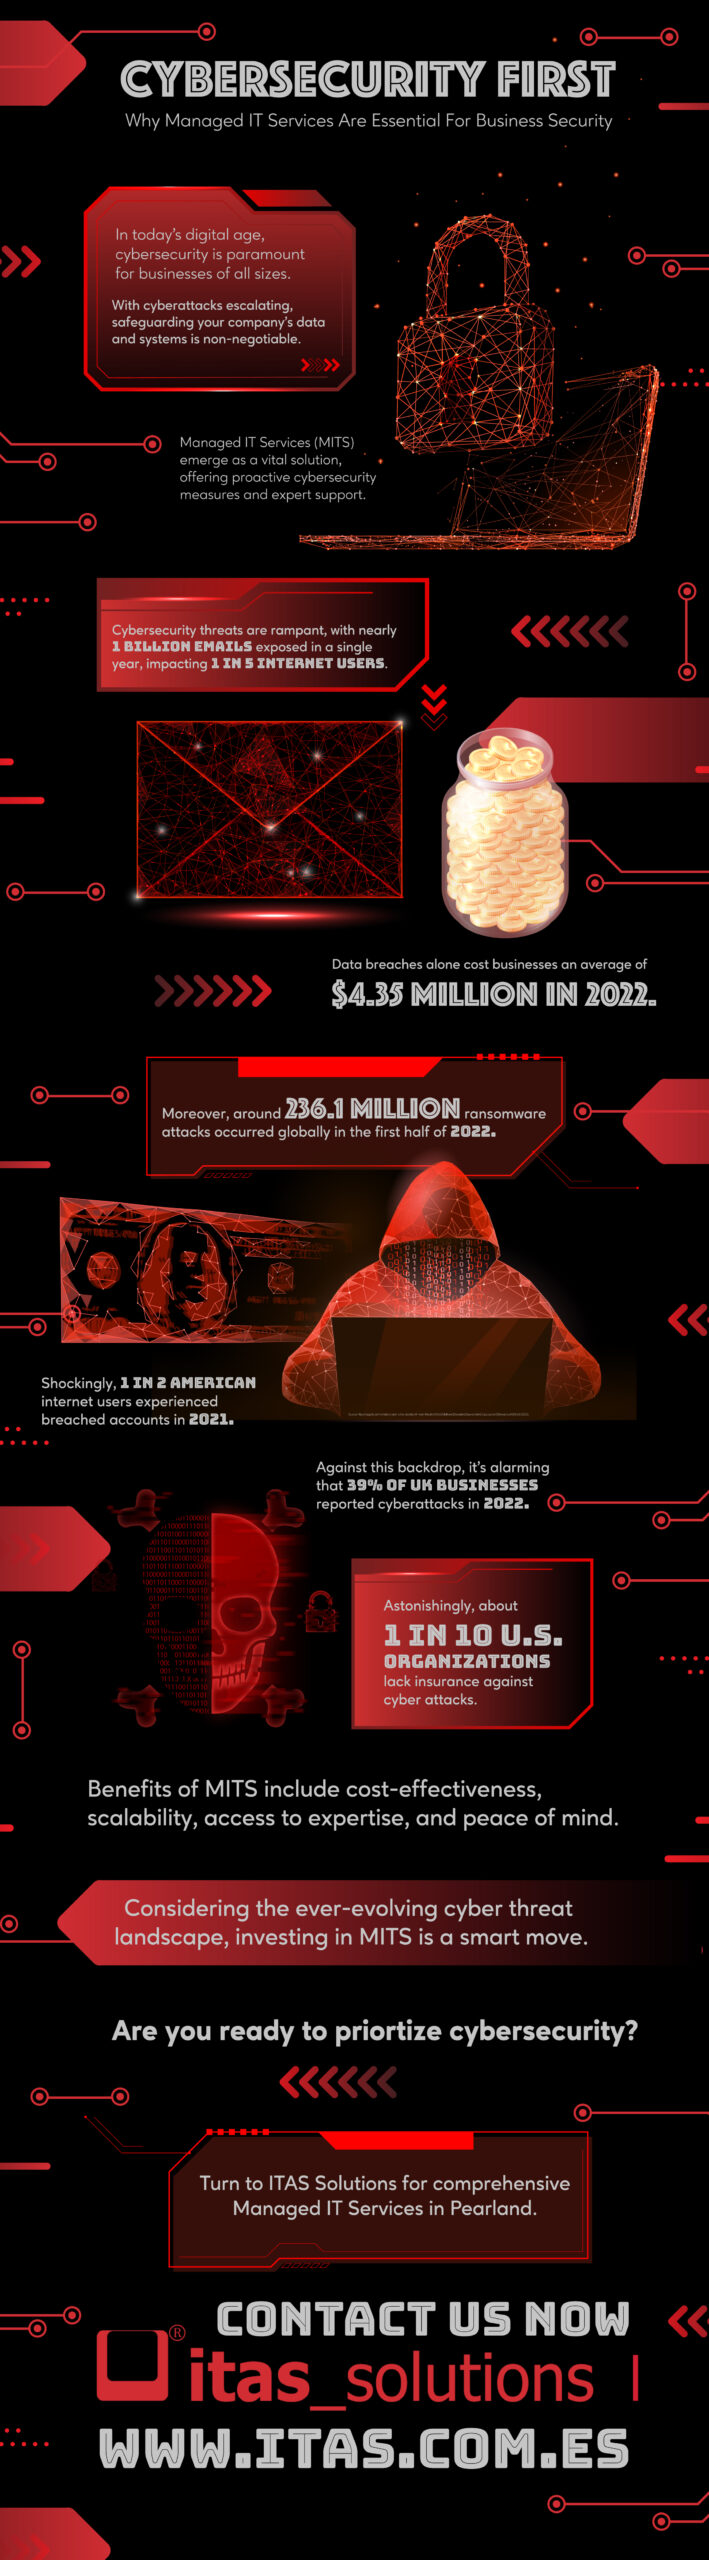 Cybersecurity First: Why Managed IT Services are Essential for Business Security - Infograph